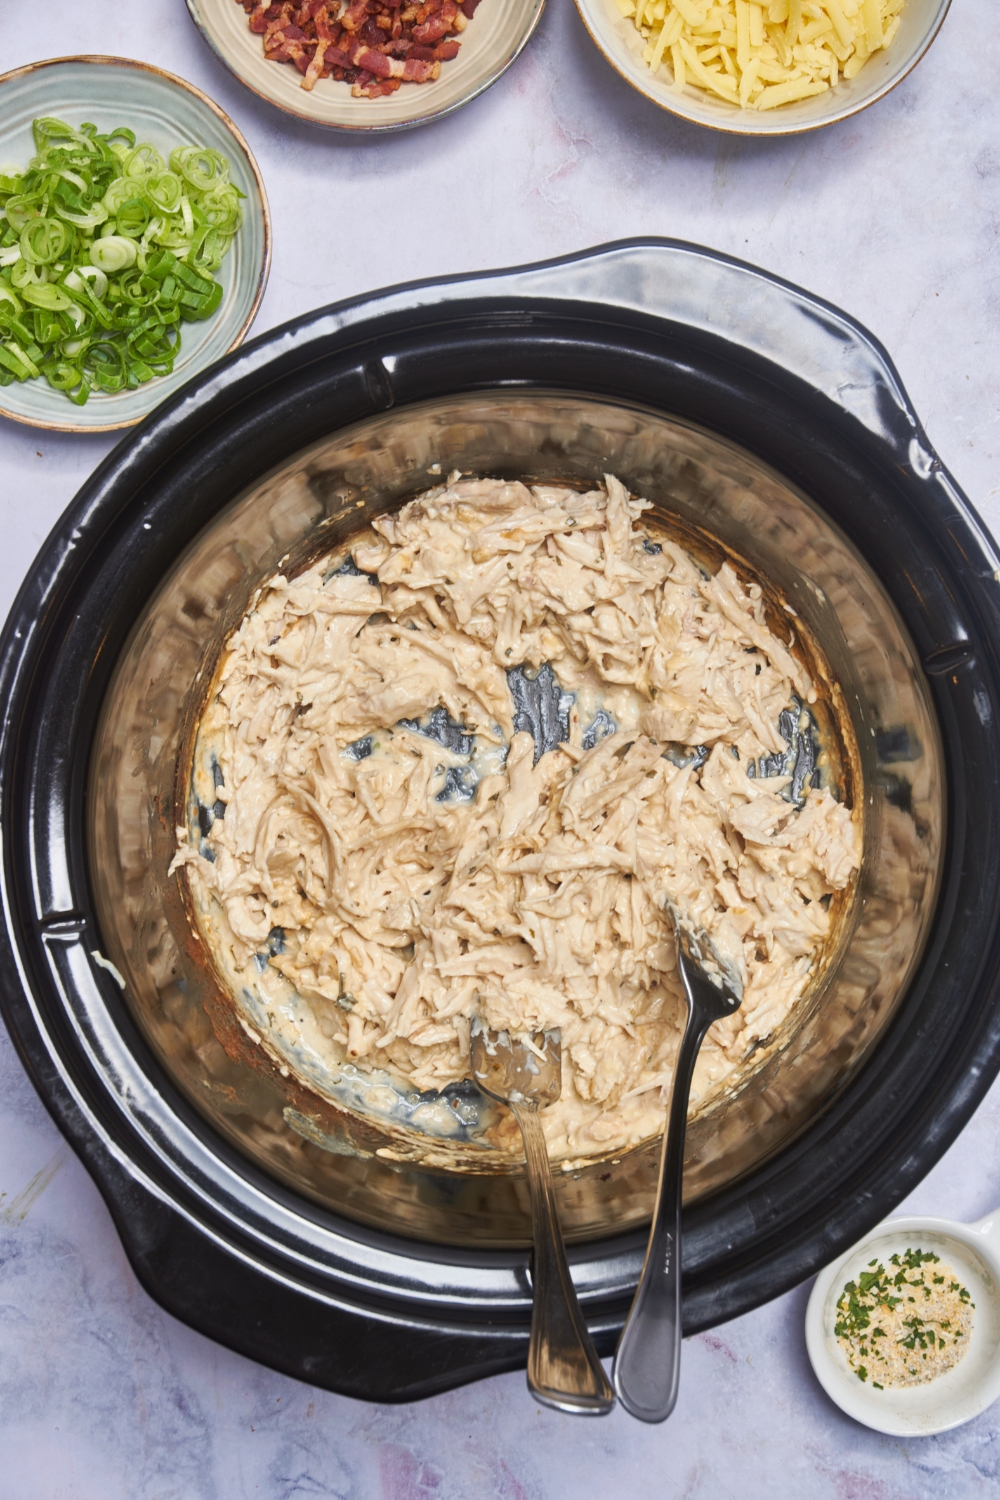 A crock pot filled with cooked and shredded chicken in a creamy seasoned sauce.